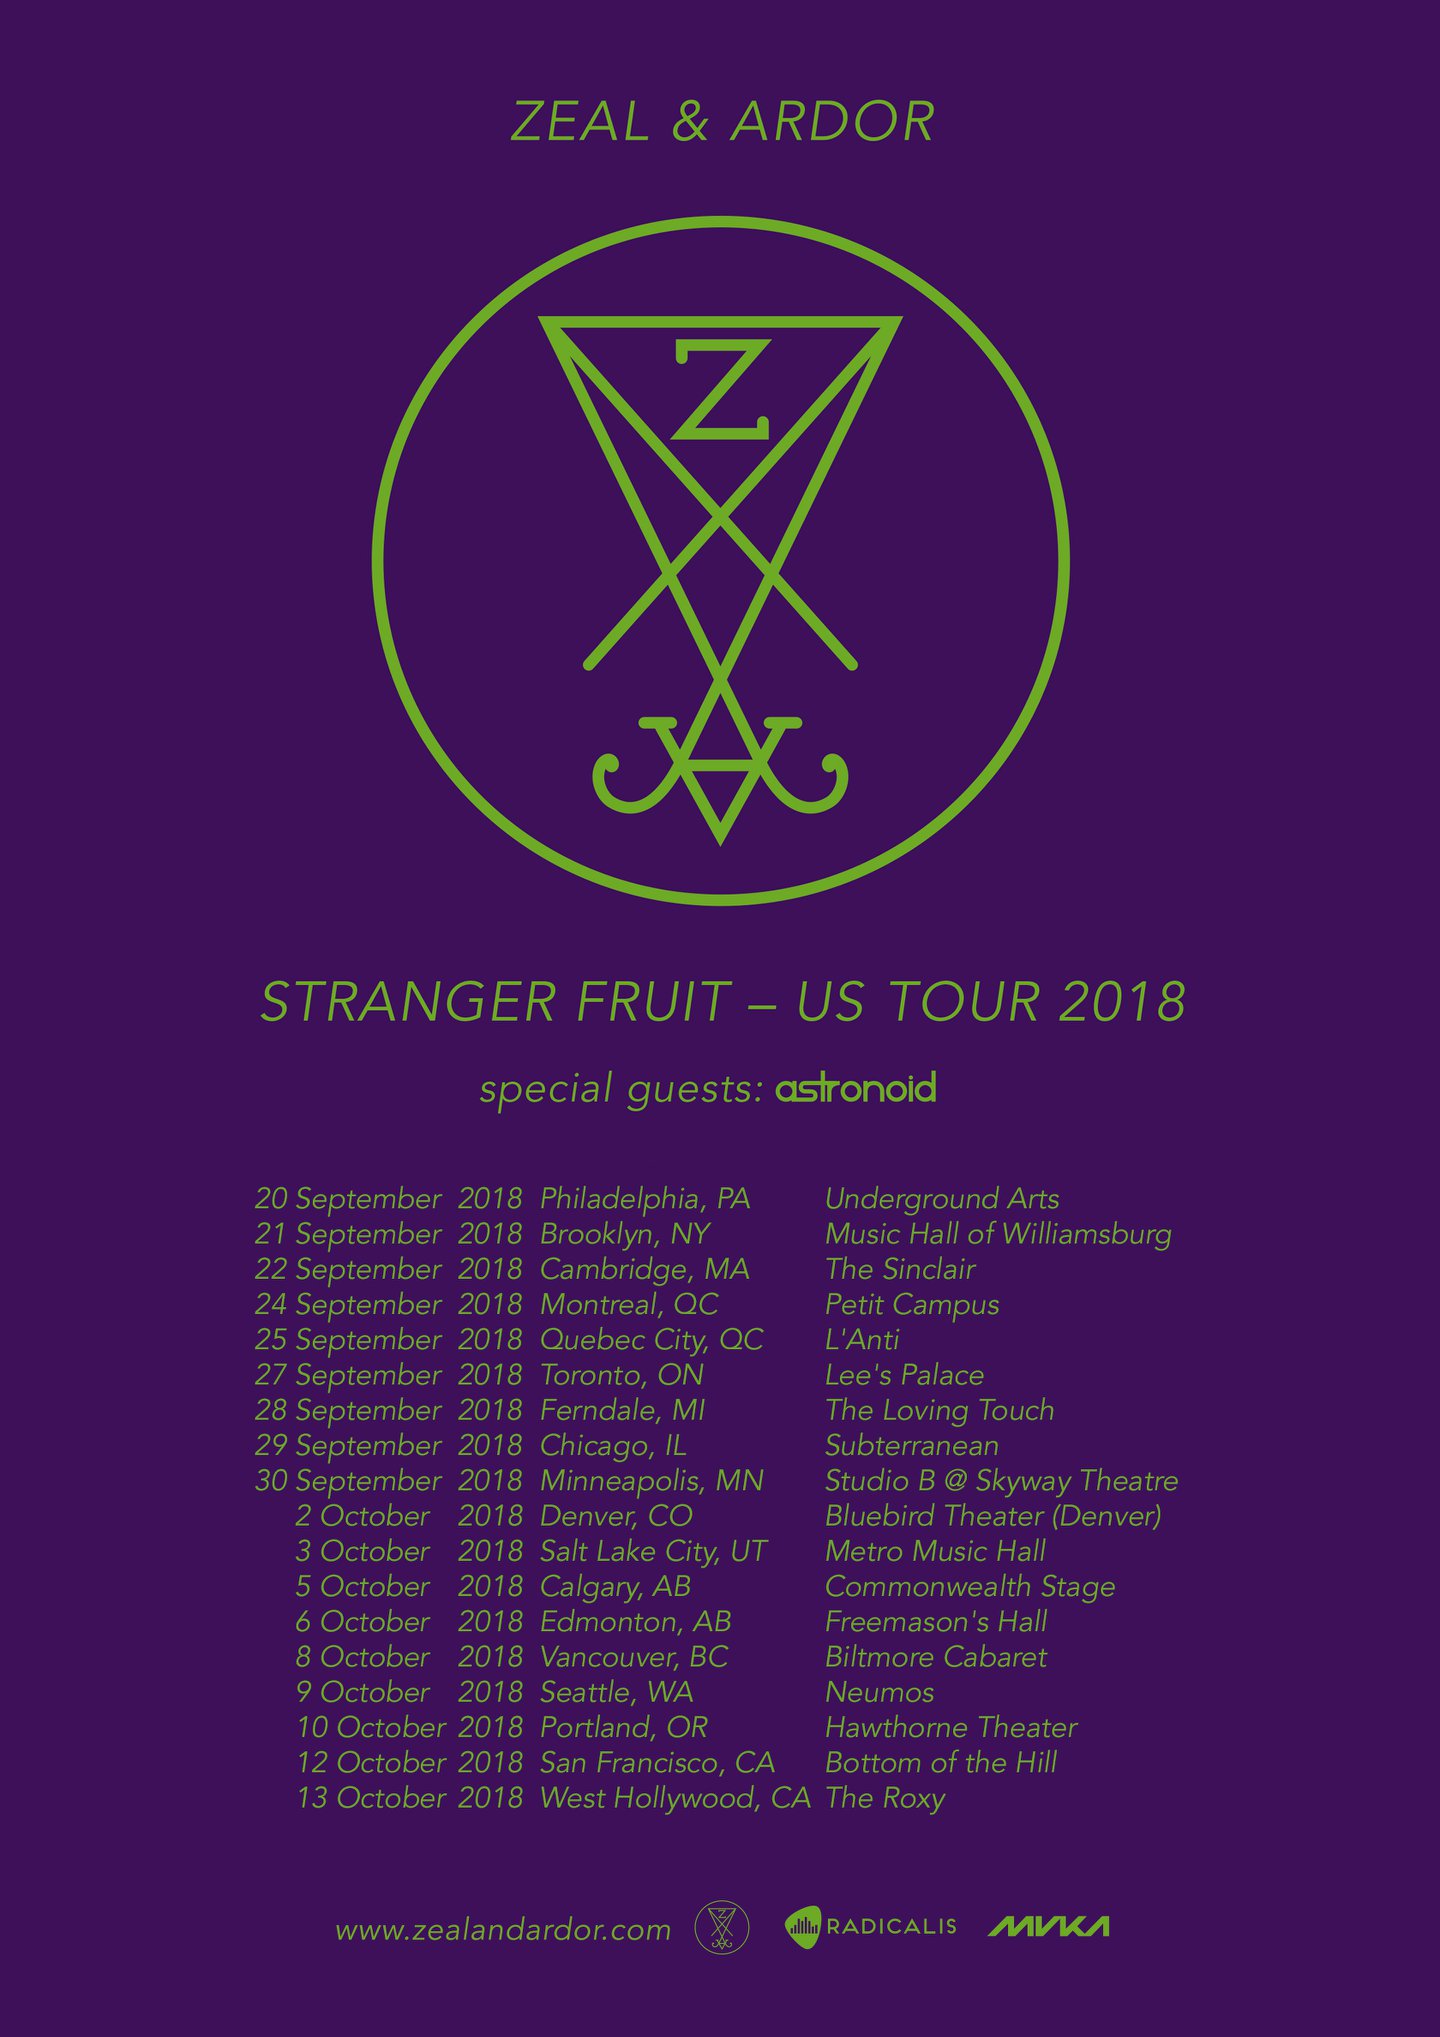 Zeal & Ardor announce North American Tour with Astronoid